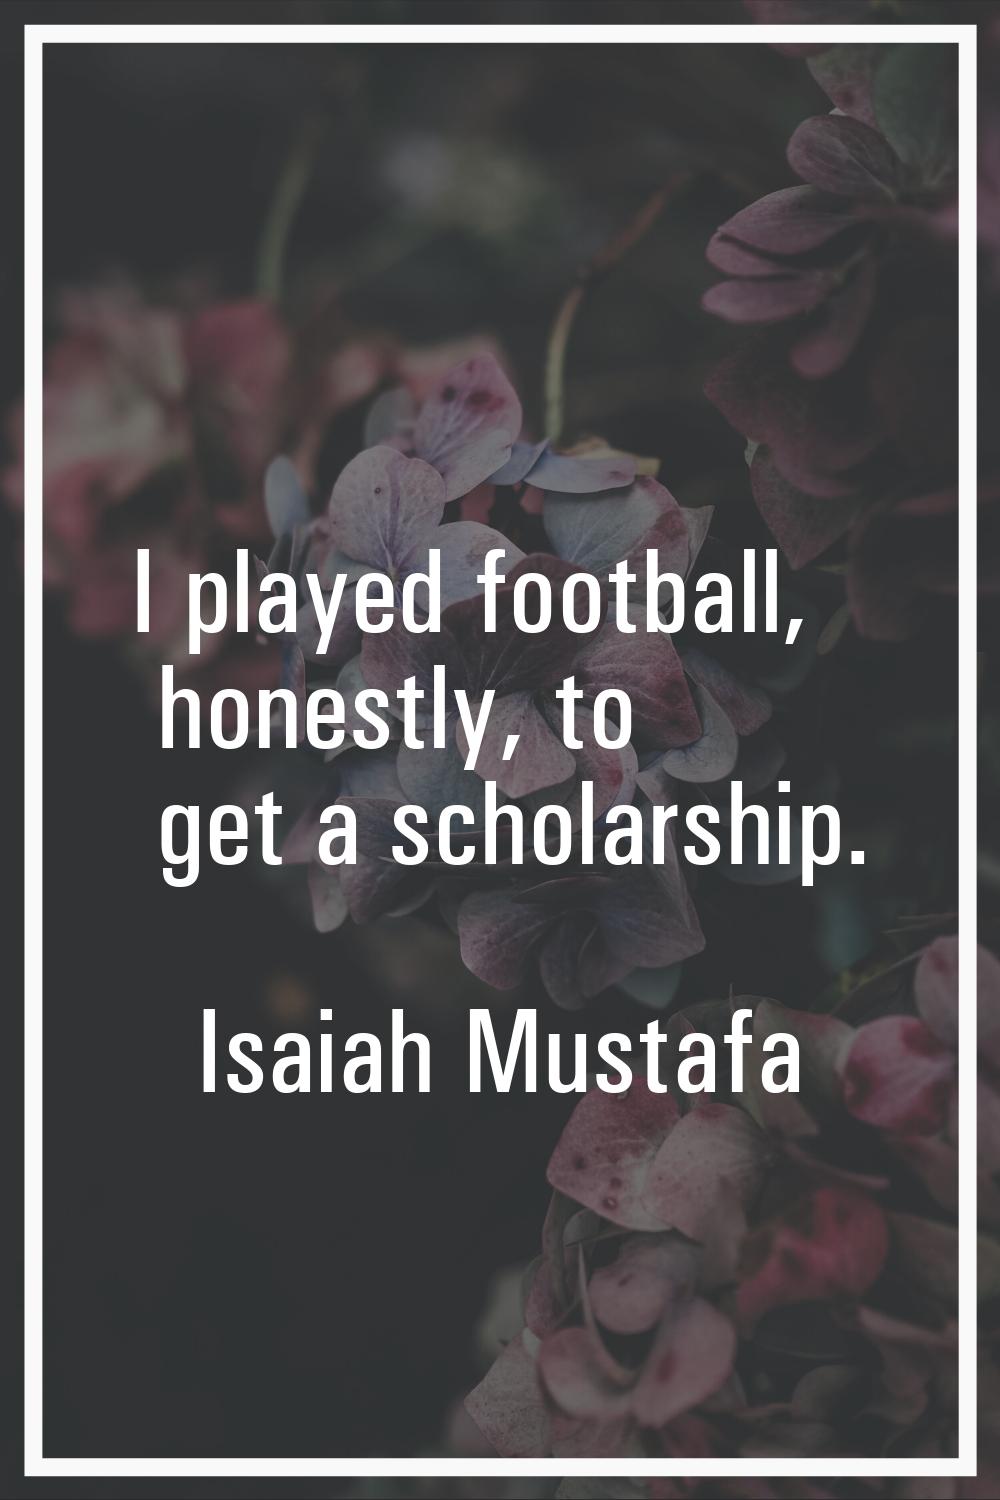 I played football, honestly, to get a scholarship.